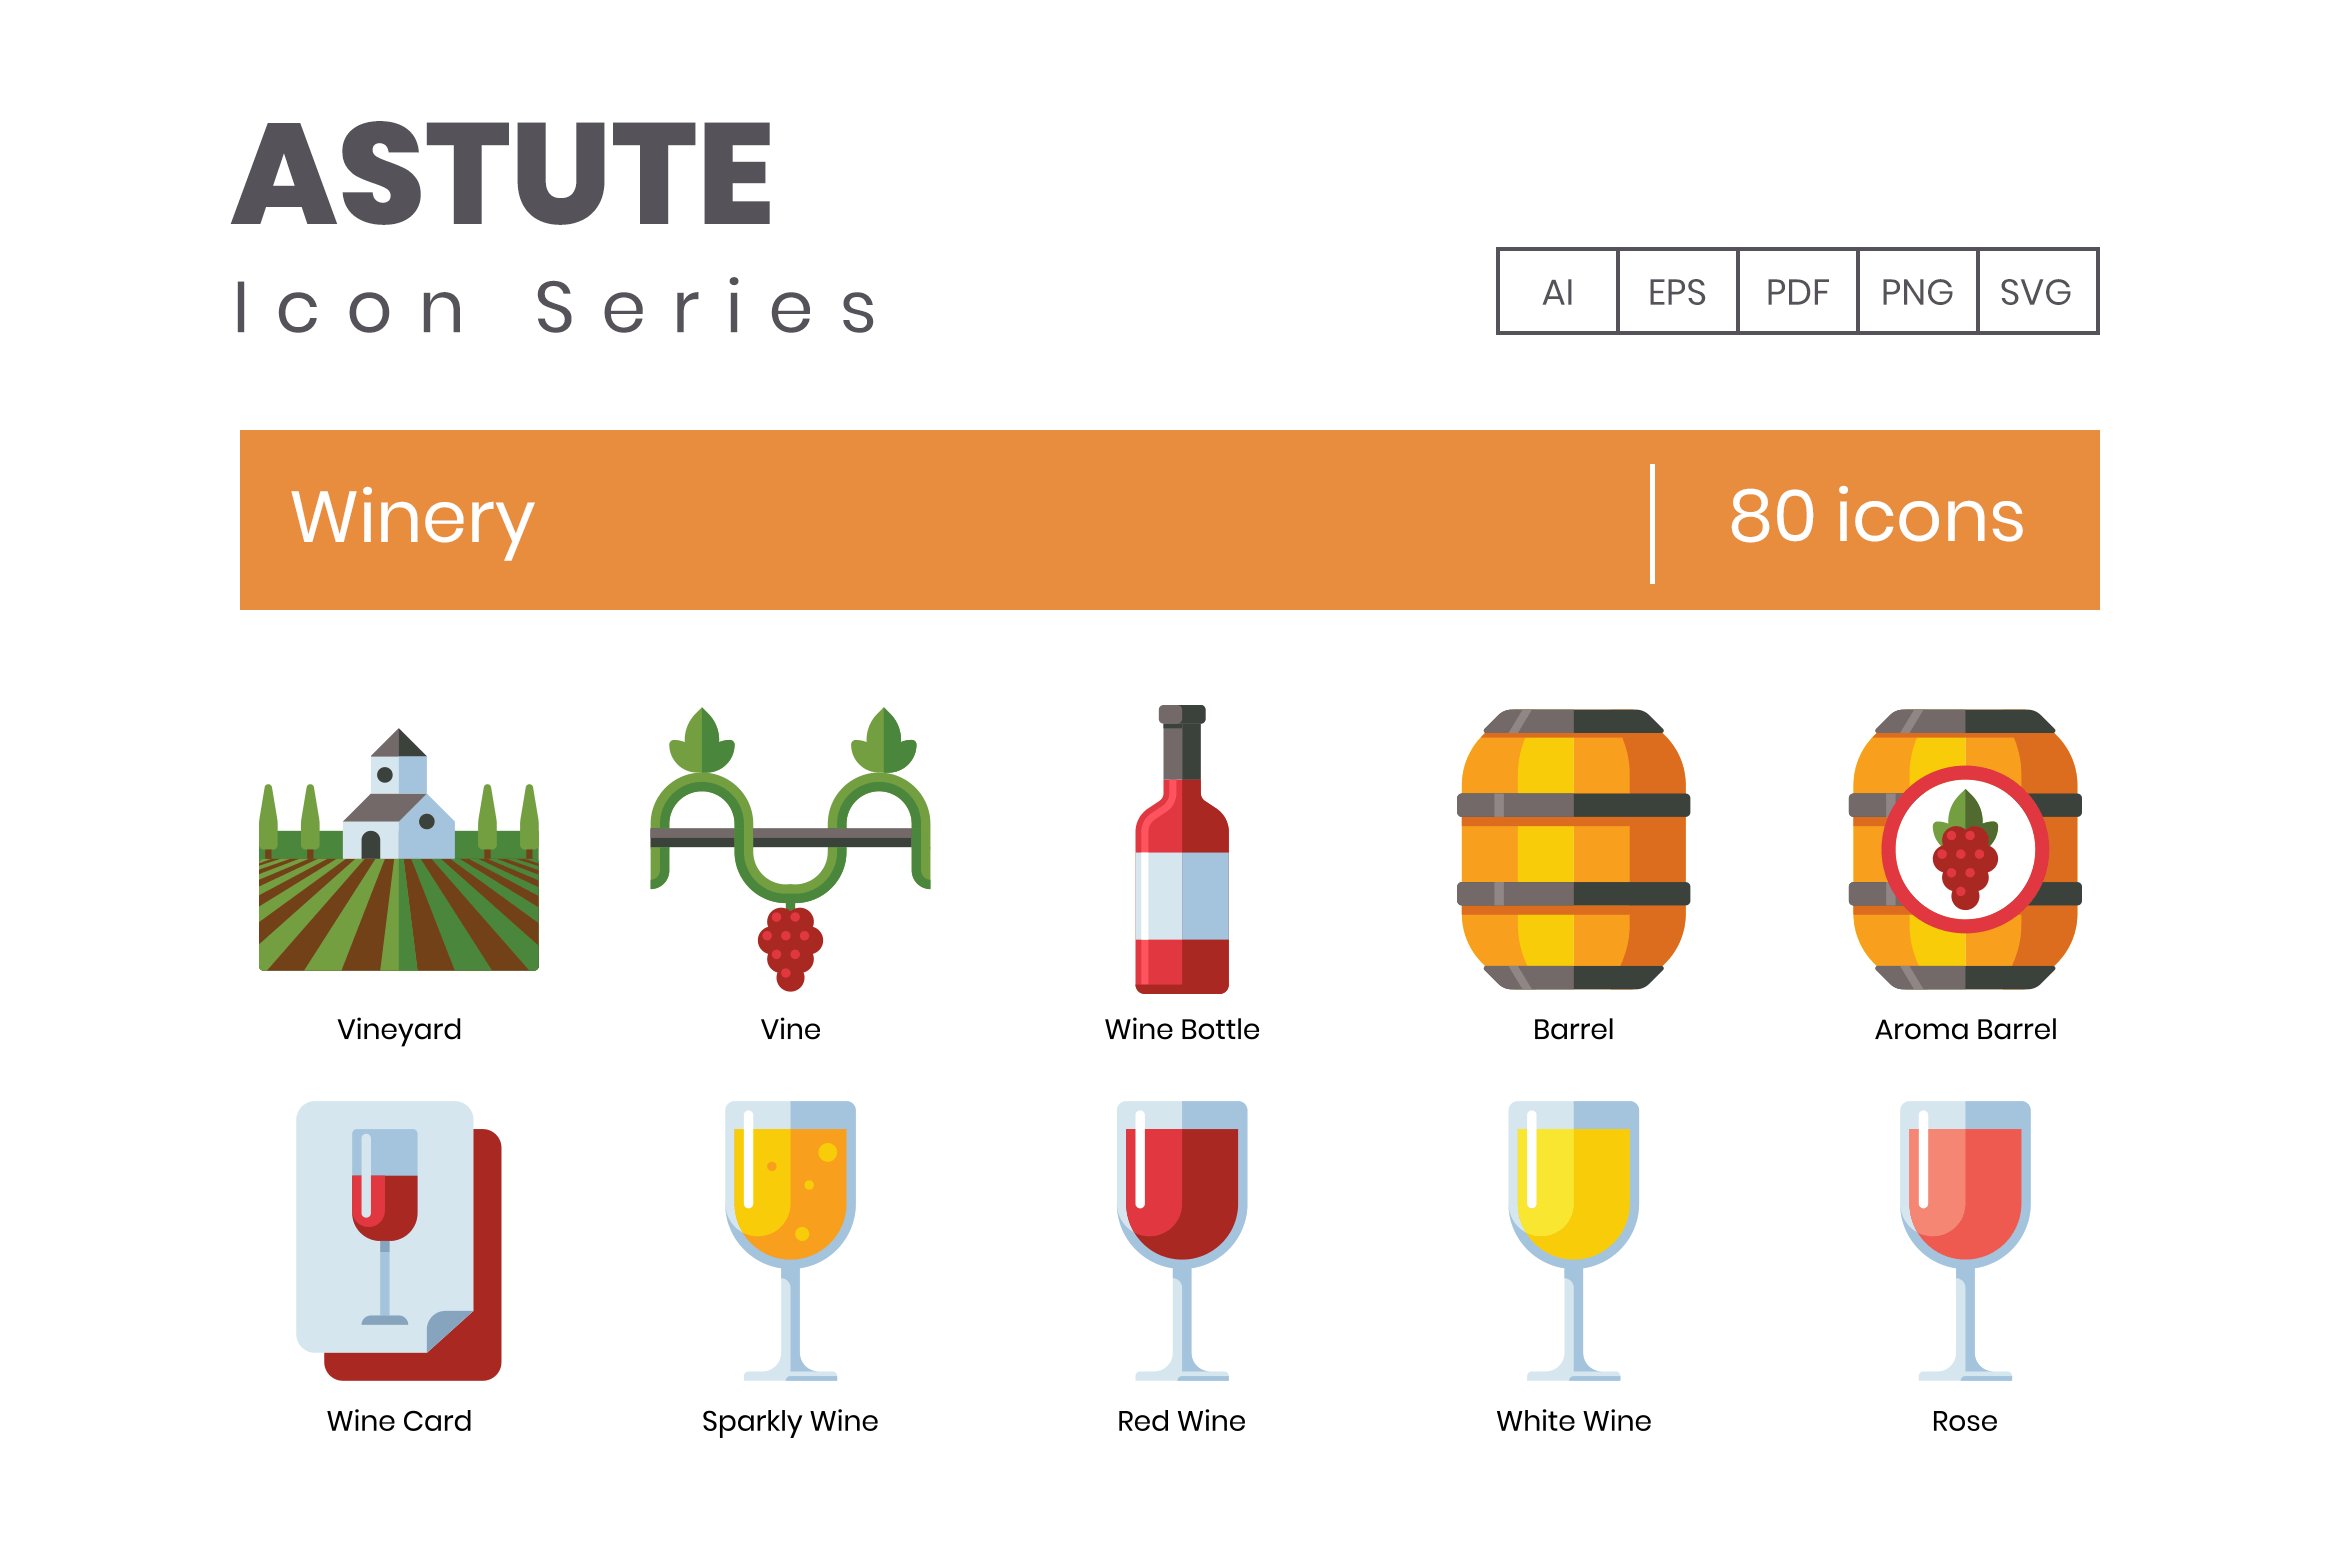 80 Winery Icons - Astute Series cover image.